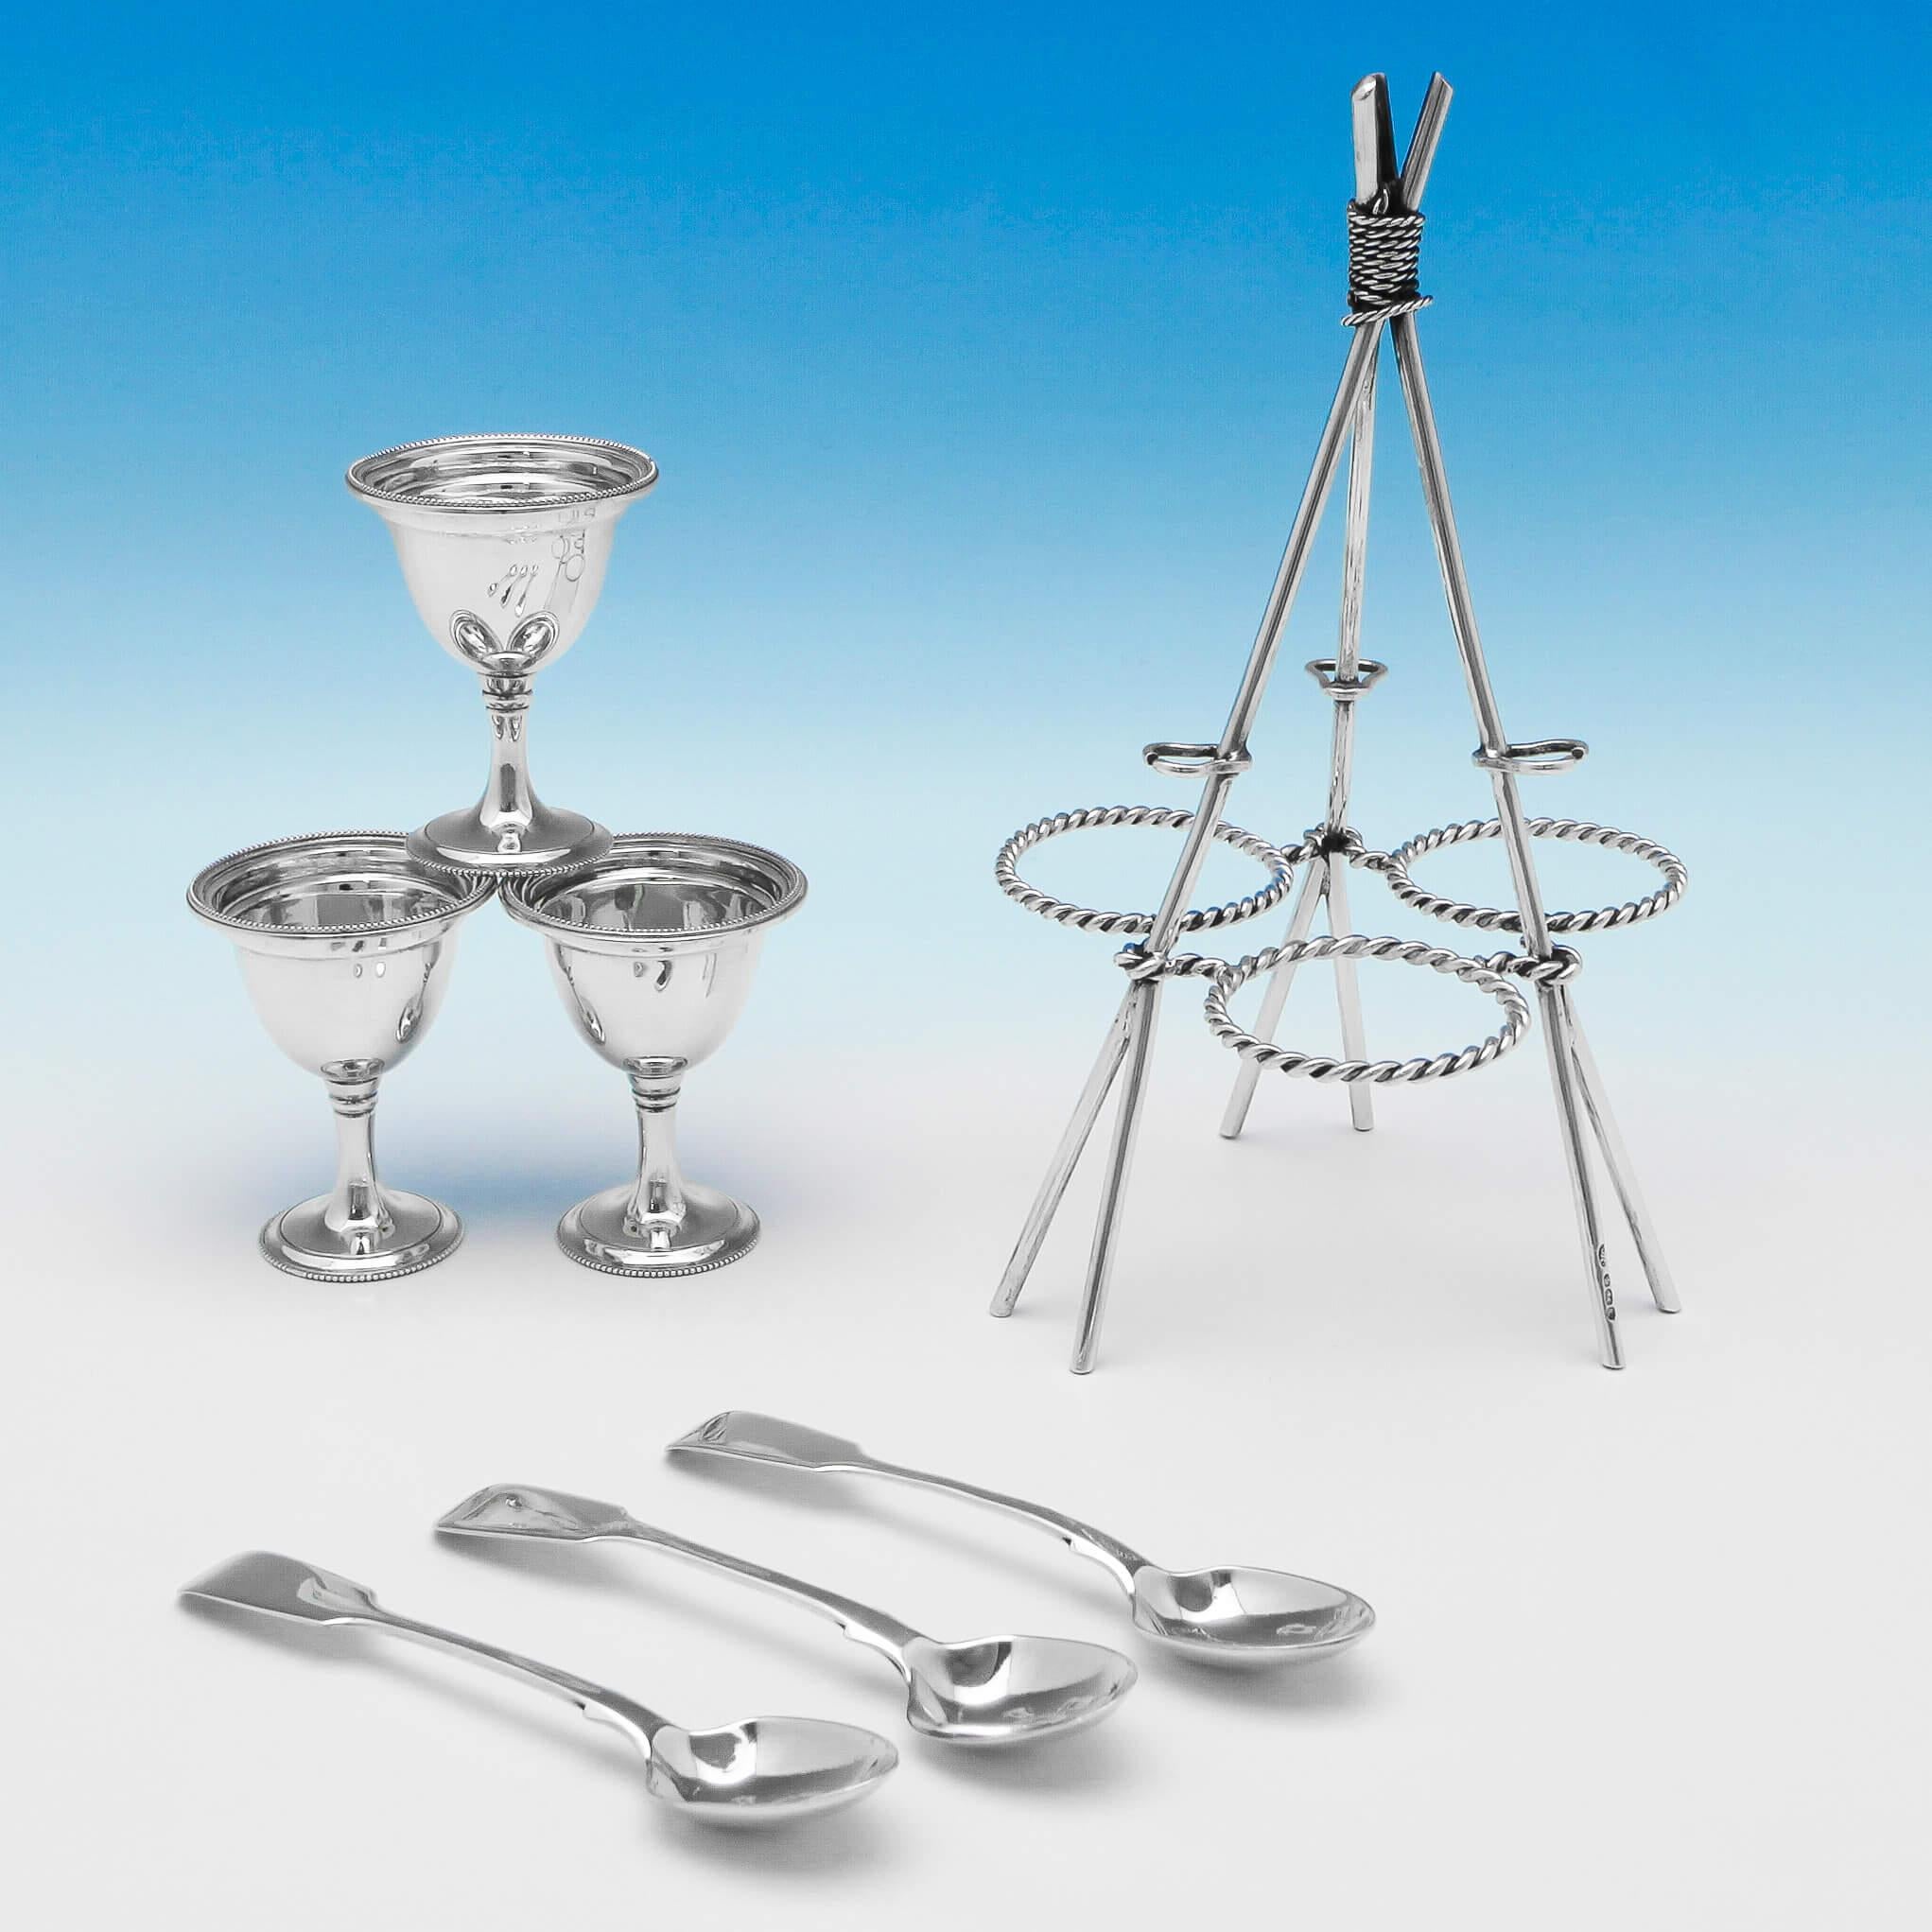 Hallmarked in Sheffield in 1894 by John Round & Son Ltd., this novelty, Victorian, antique sterling silver egg cruet, takes the form of a lashed cooking tripod, with a silver rope fastening the egg cups in place and a spoon attached to each leg. The